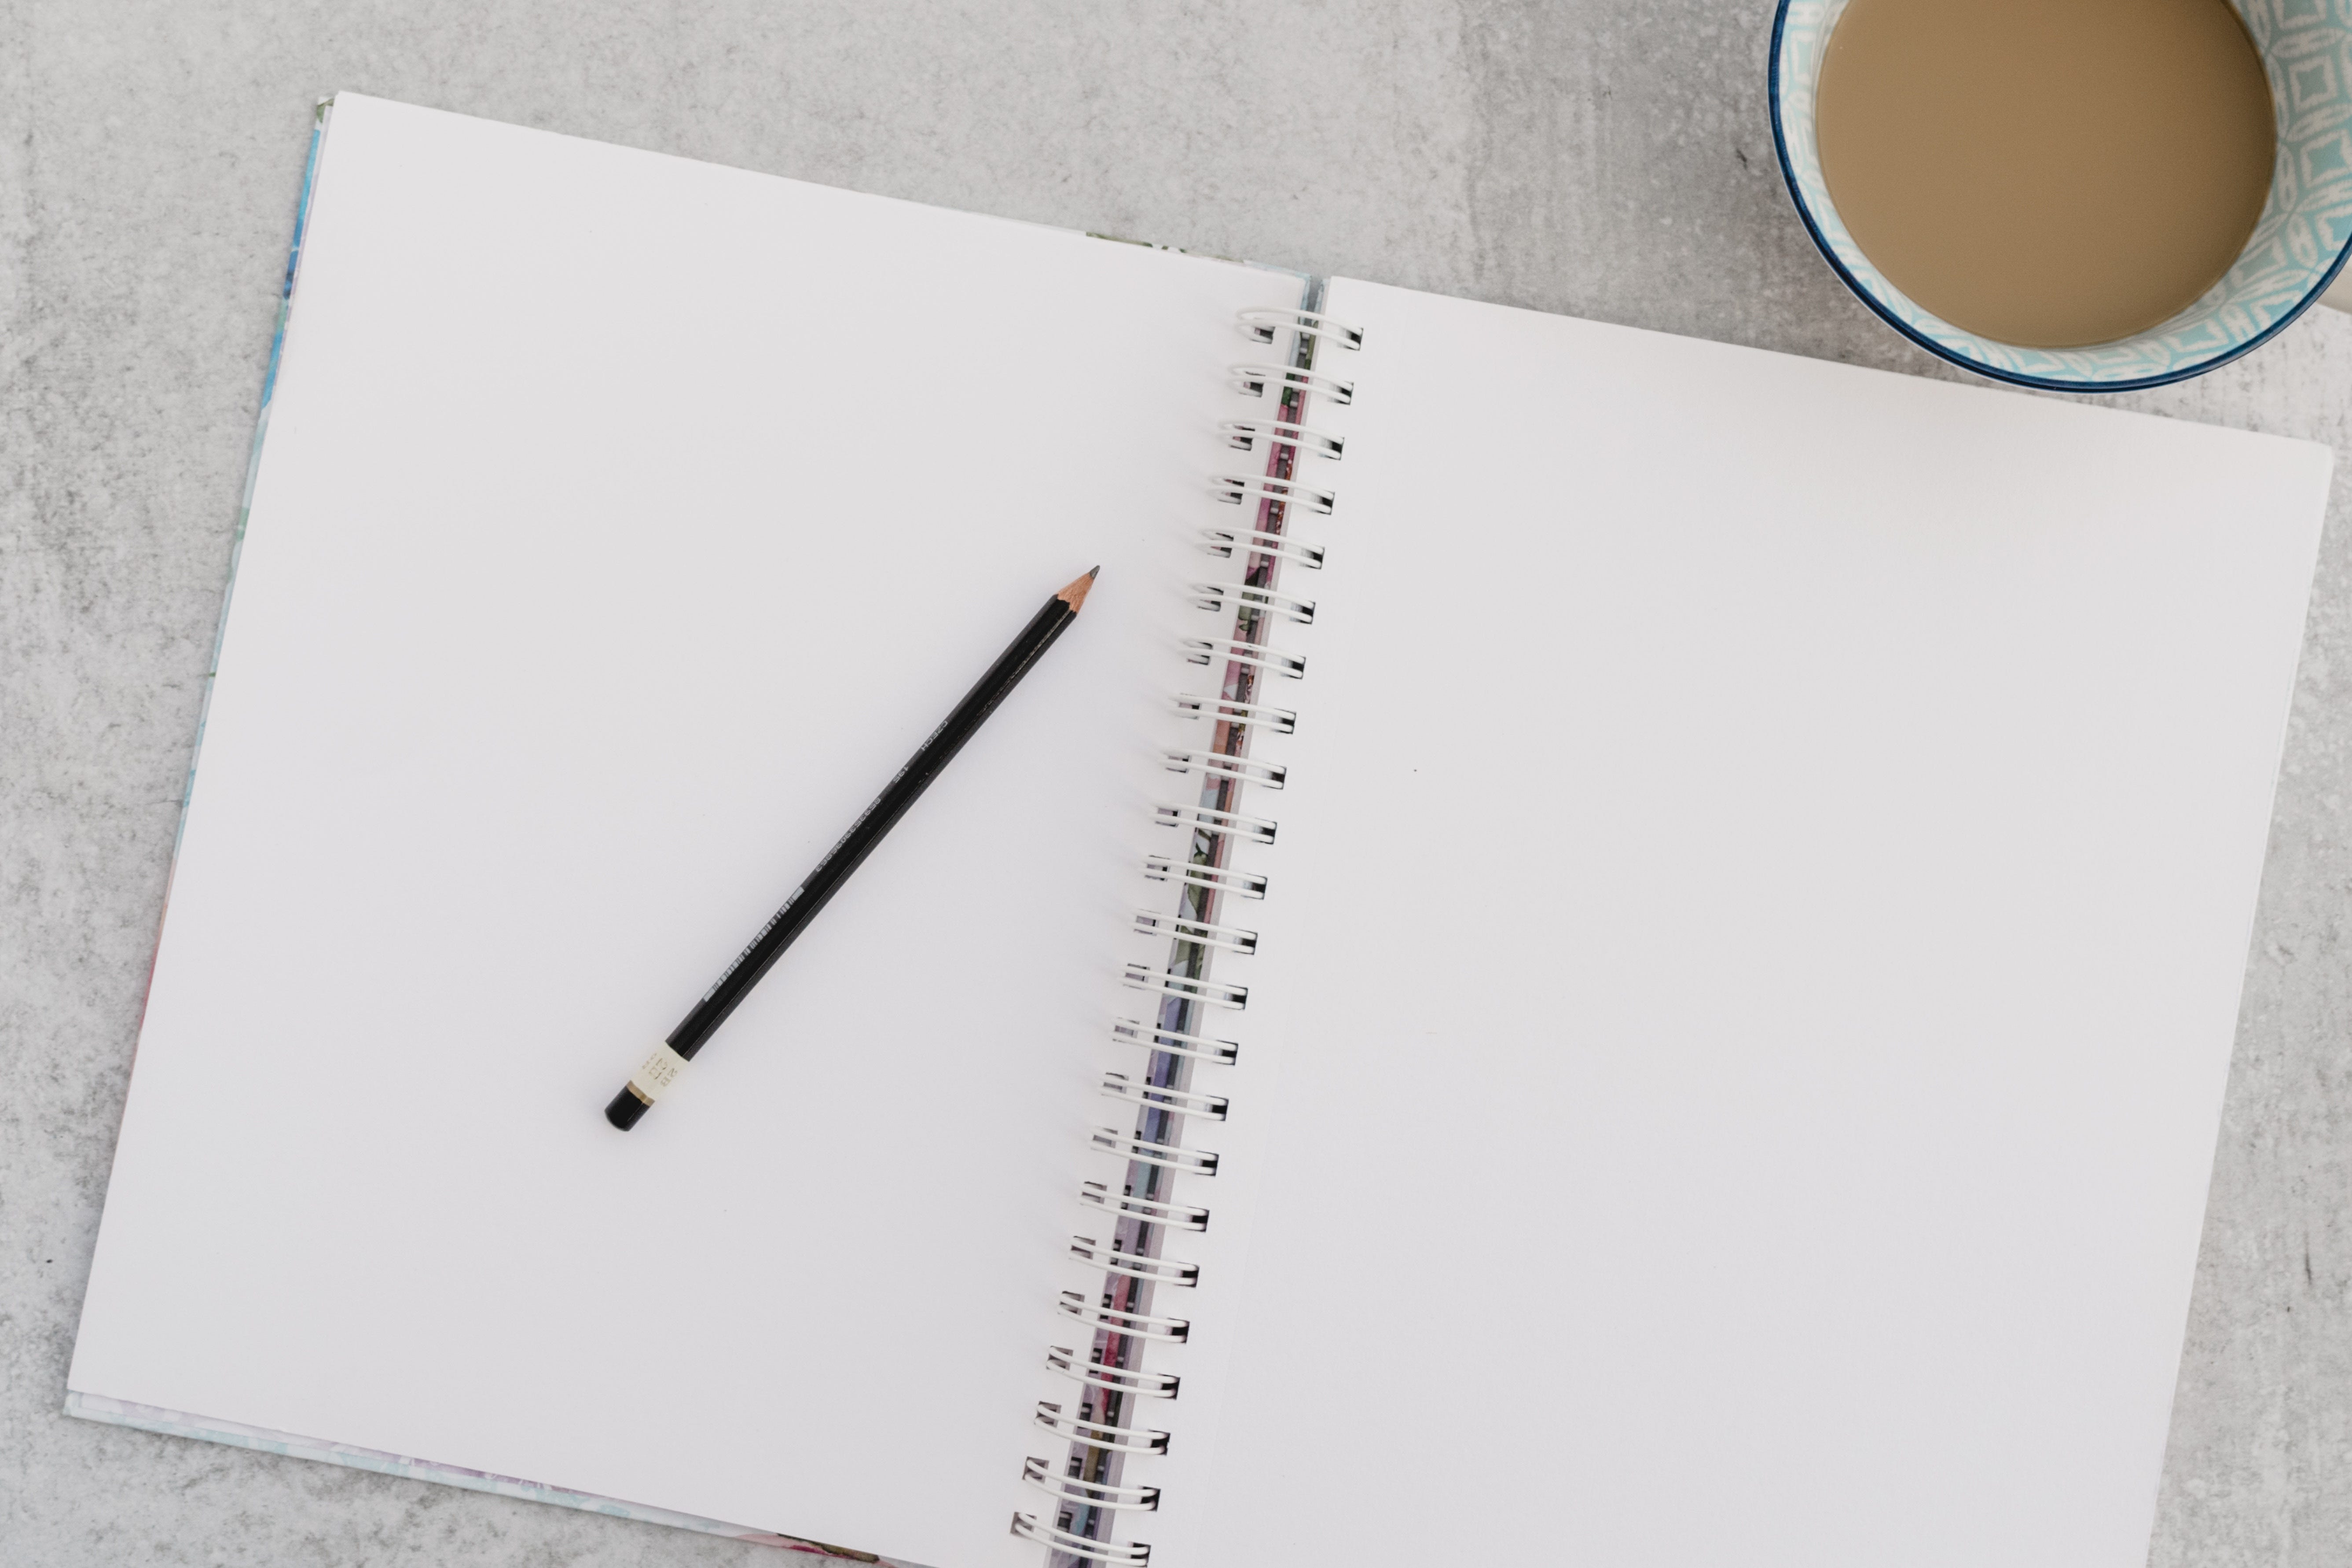 Conquering Blank Page Anxiety   The Startup   Medium